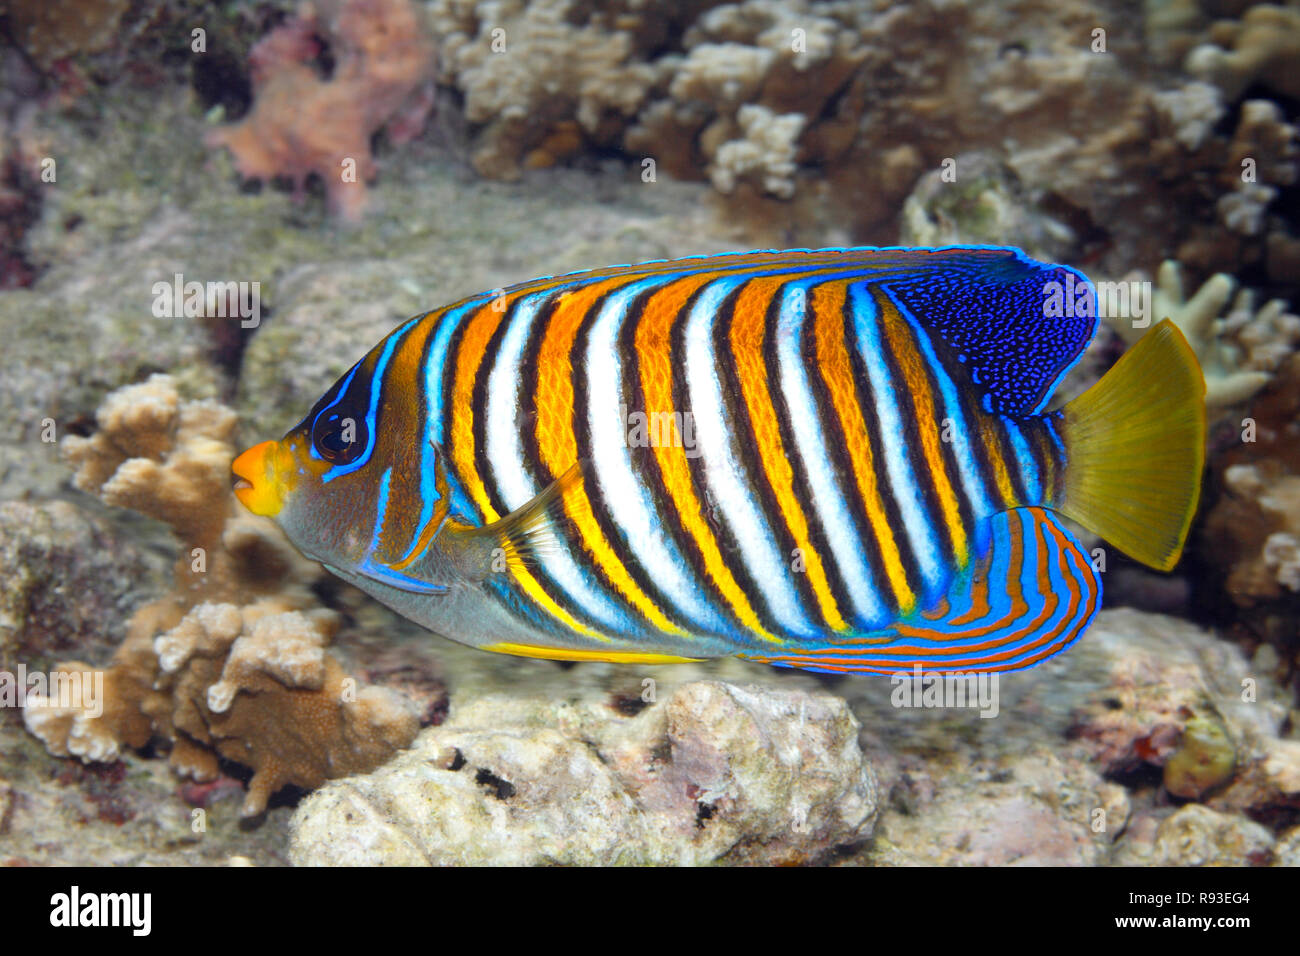 Regal Angelfish, Pygoplites diacanthus, swimming over coral reef. Also known as Royal Angelfish. Uepi, Solomon Islands. Solomon Sea, Pacific Ocean Stock Photo